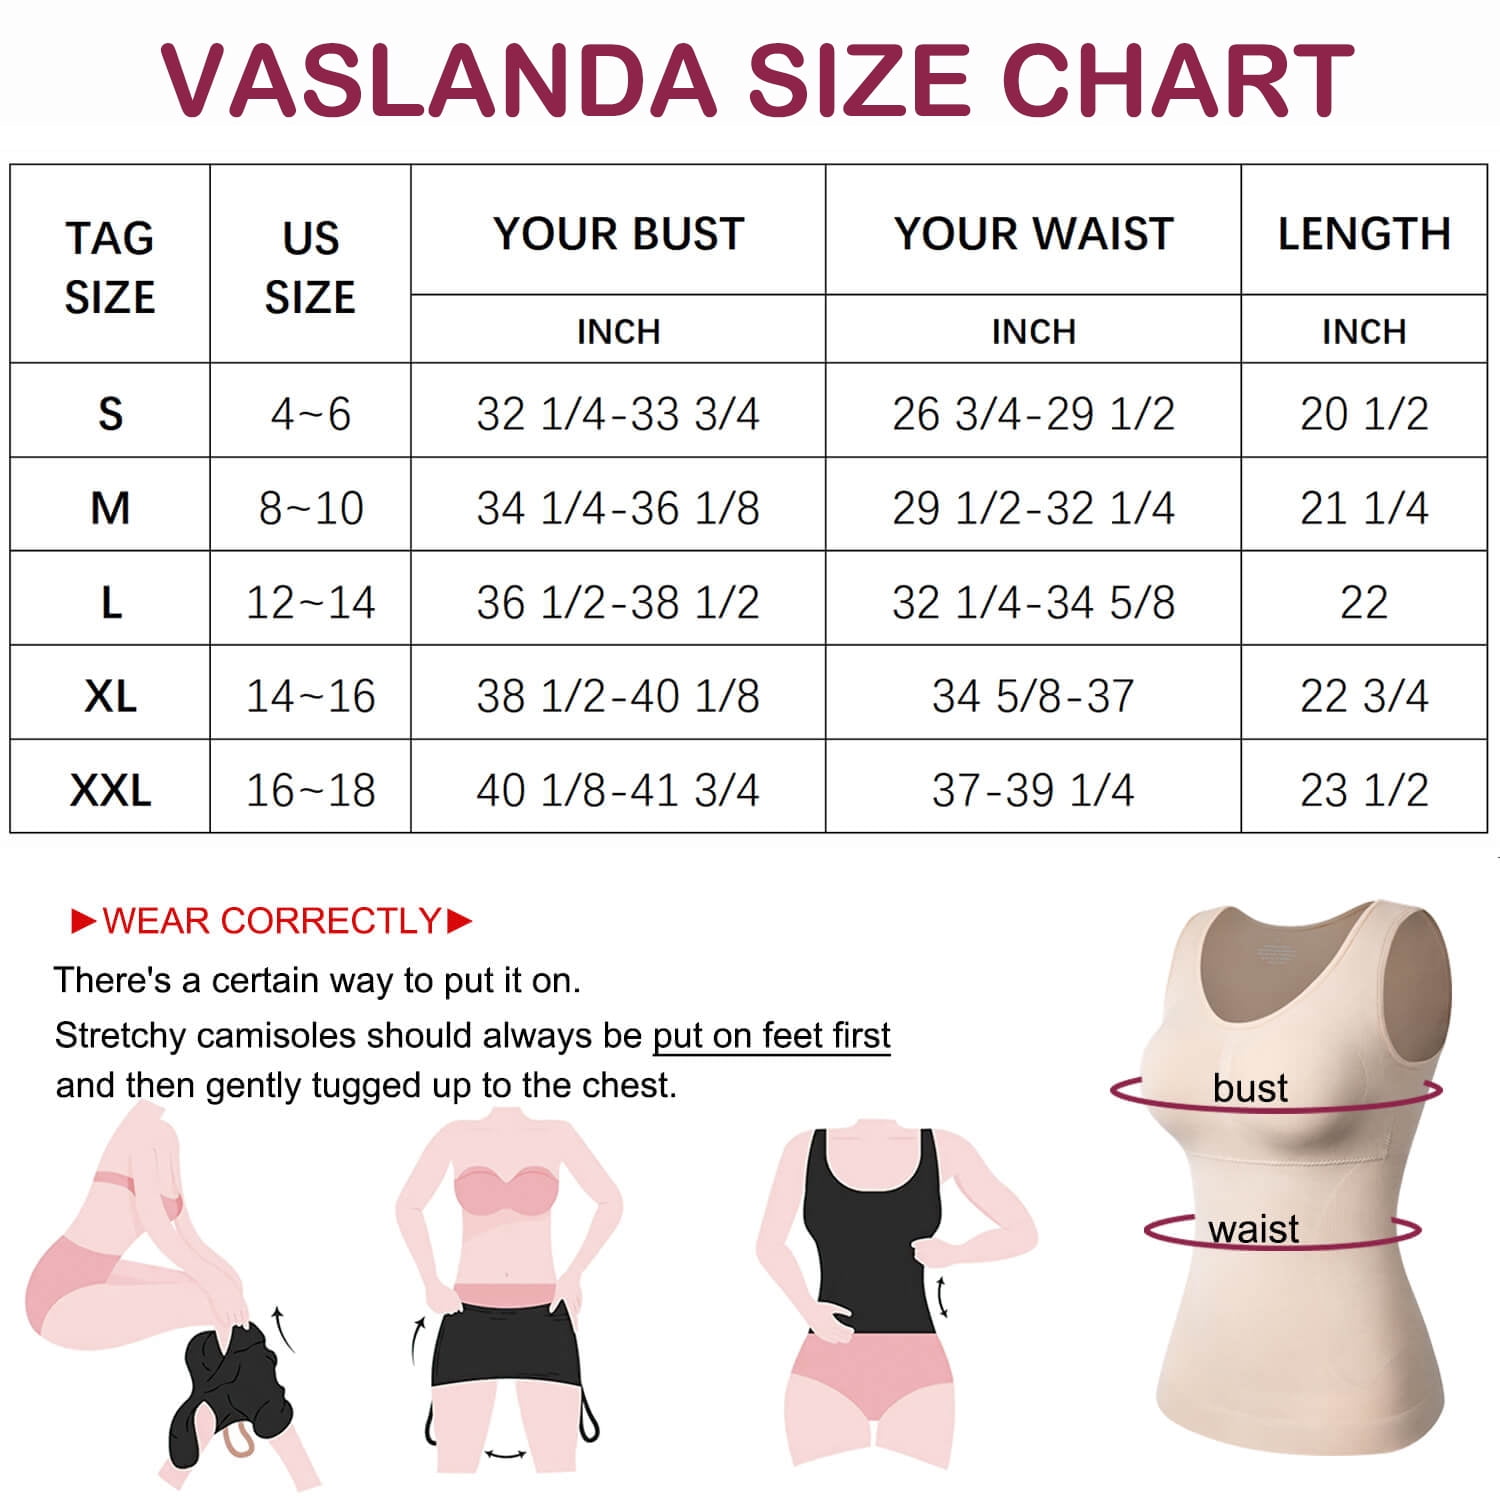 YARRCO Shapewear Camisole Tops for Women Tummy Control with Built